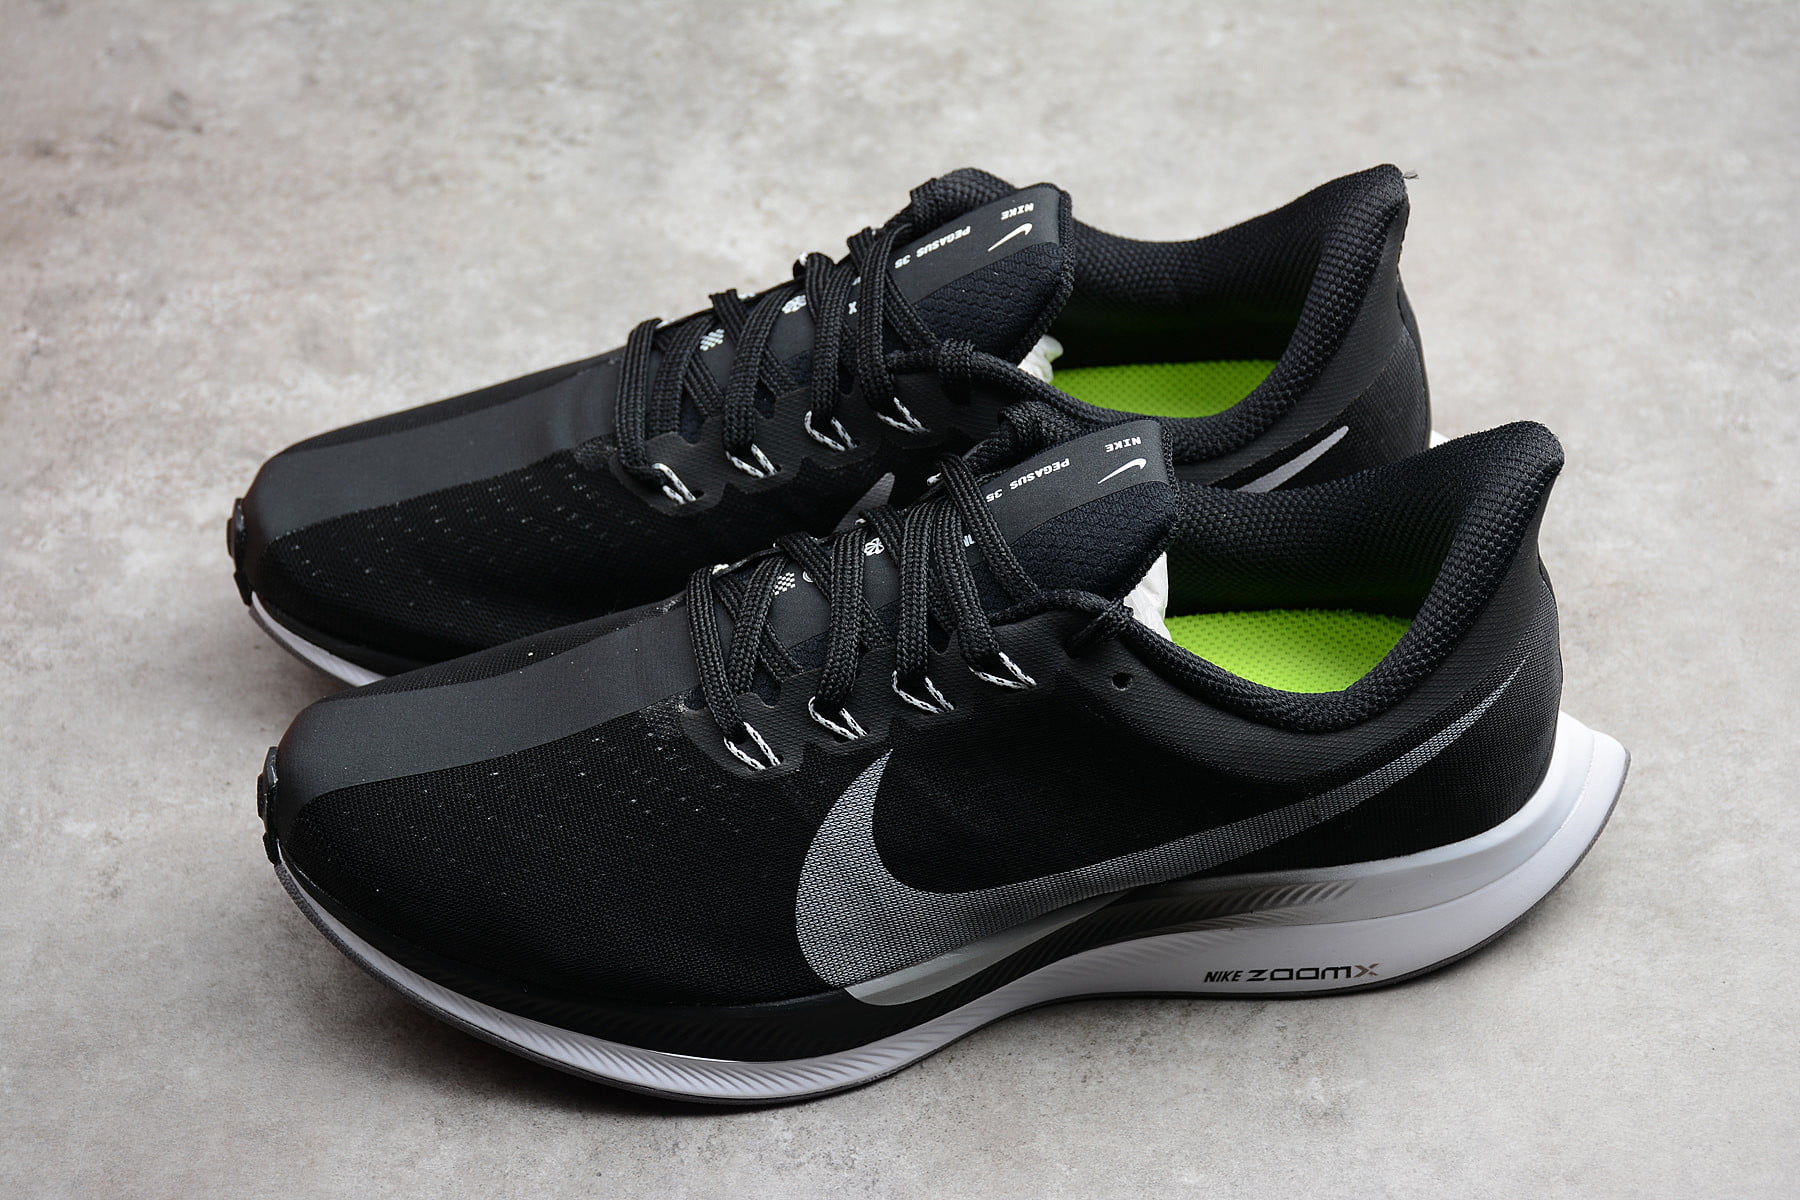 Nike Men’s Zoom Pegasus 35 Turbo Review - Lace Up For Triathlons With